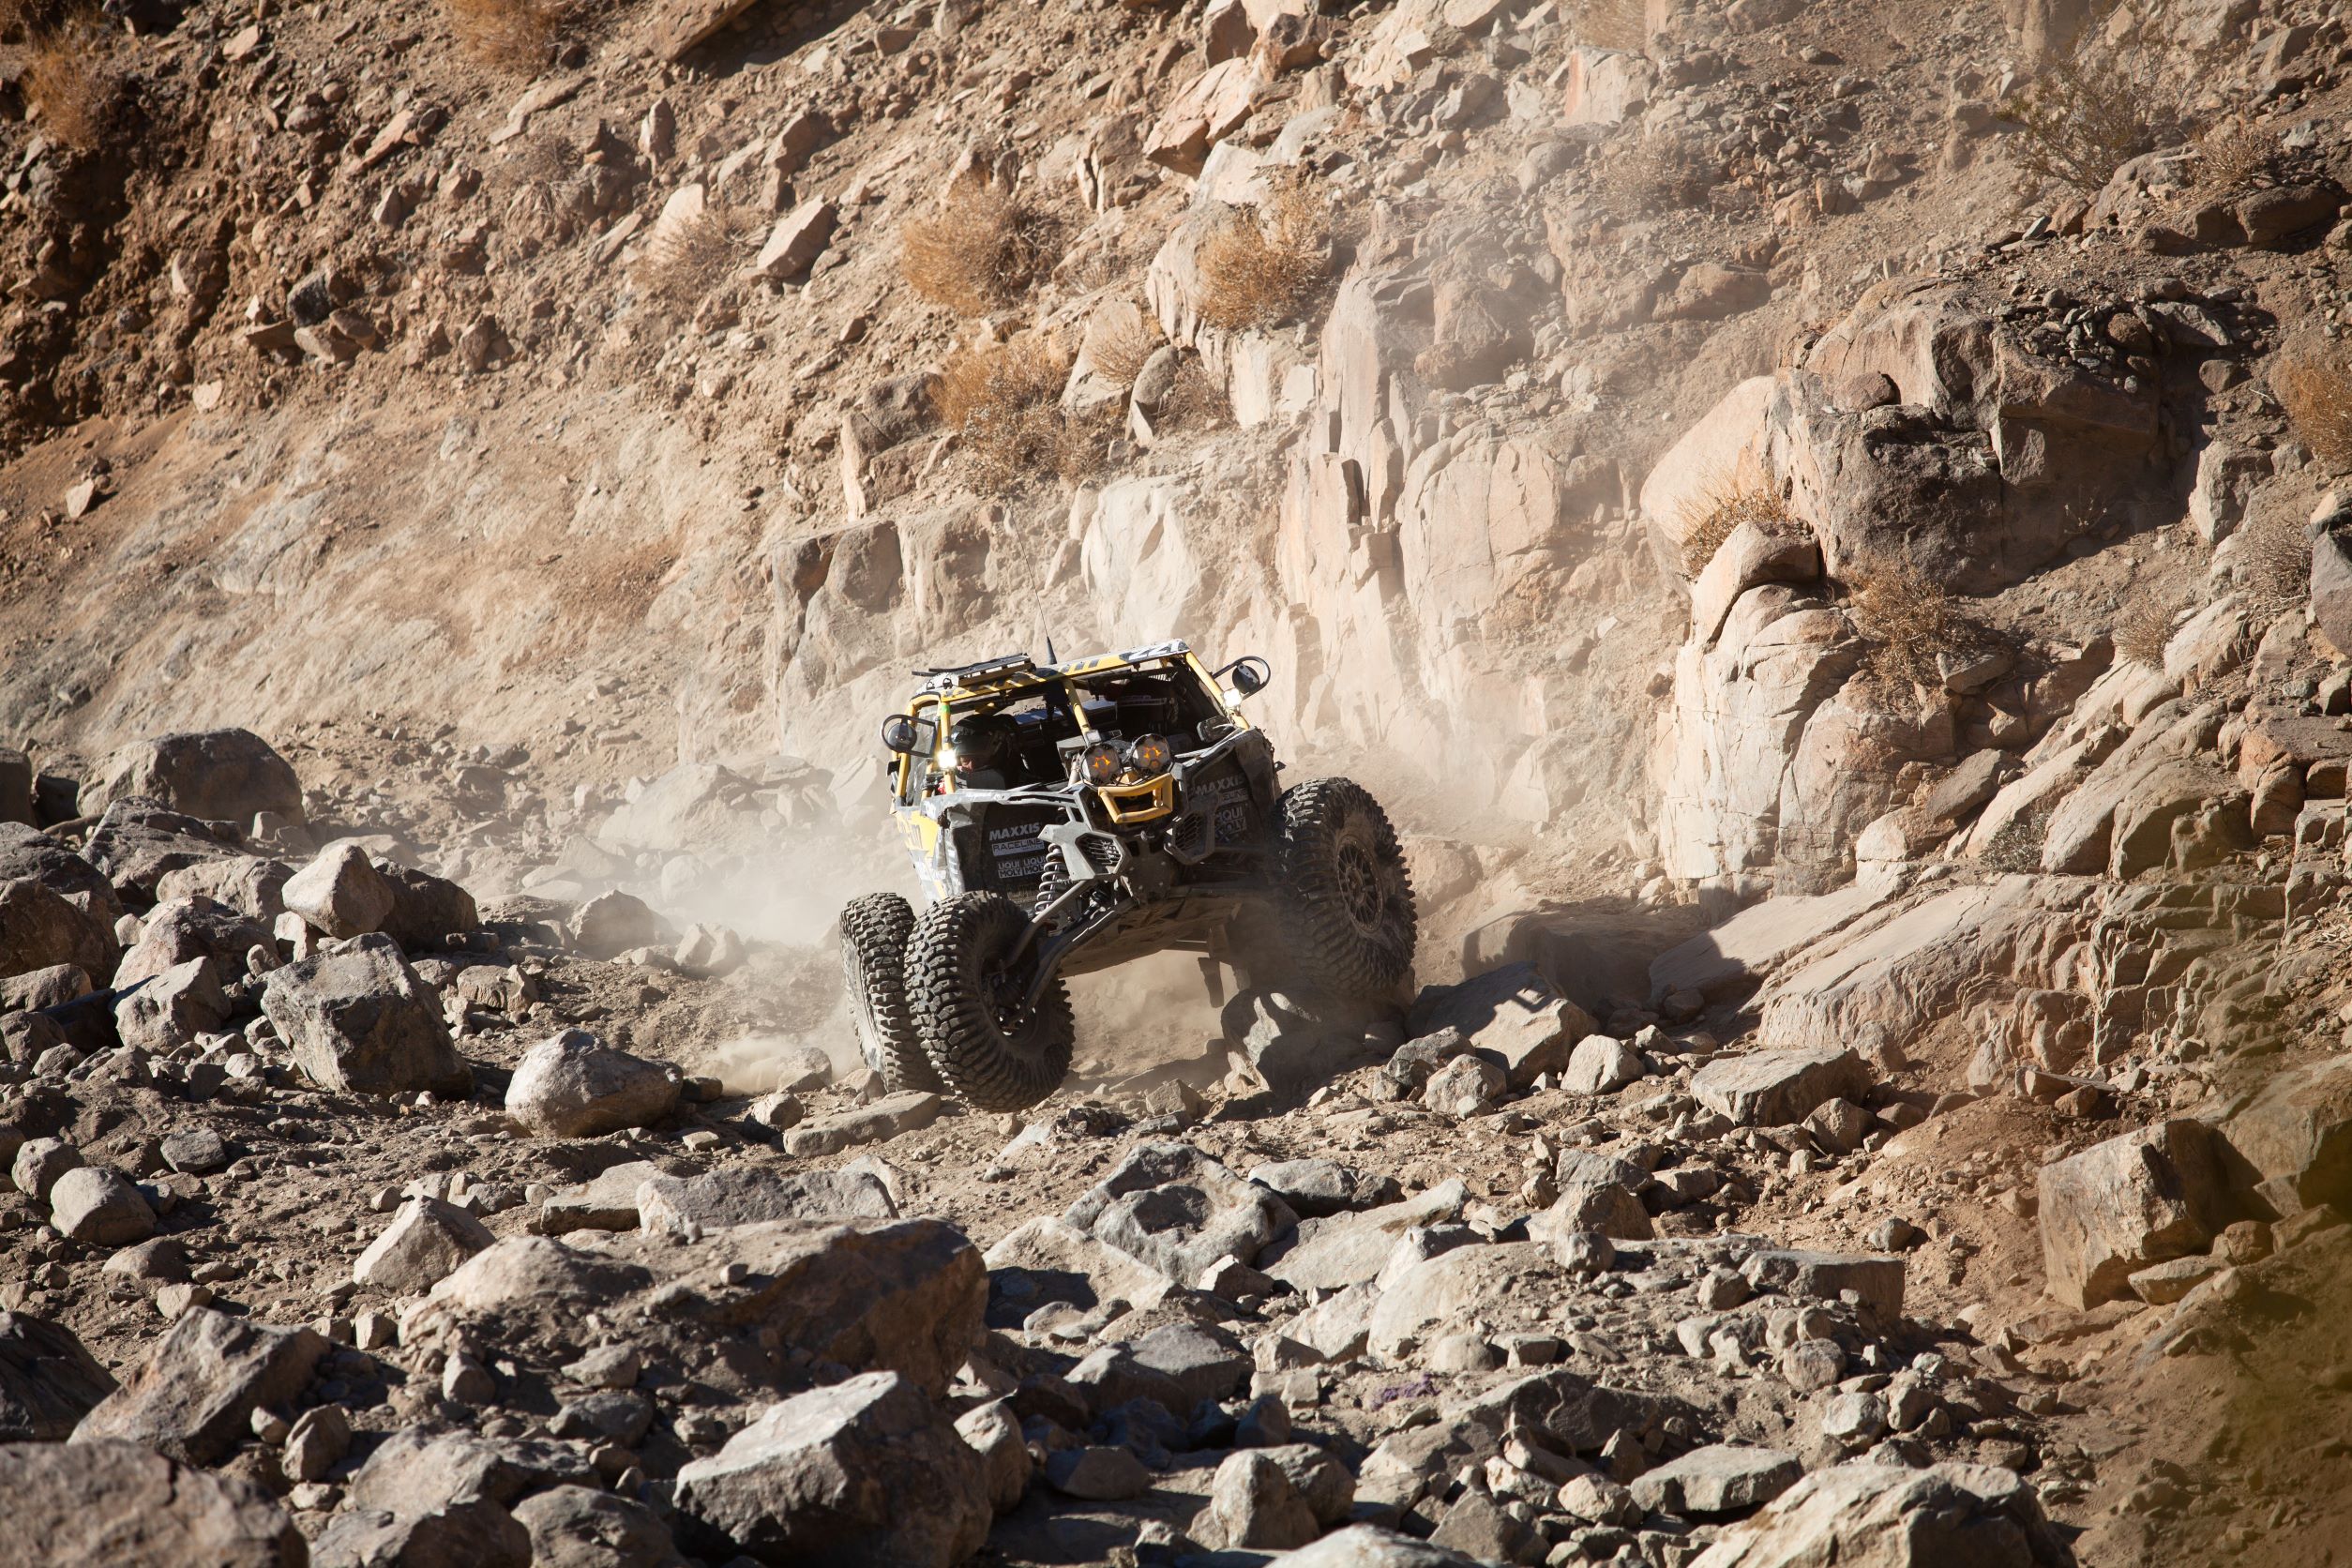 A Maverick X3 driving in rocky conditions during the Kind of the Hammers race